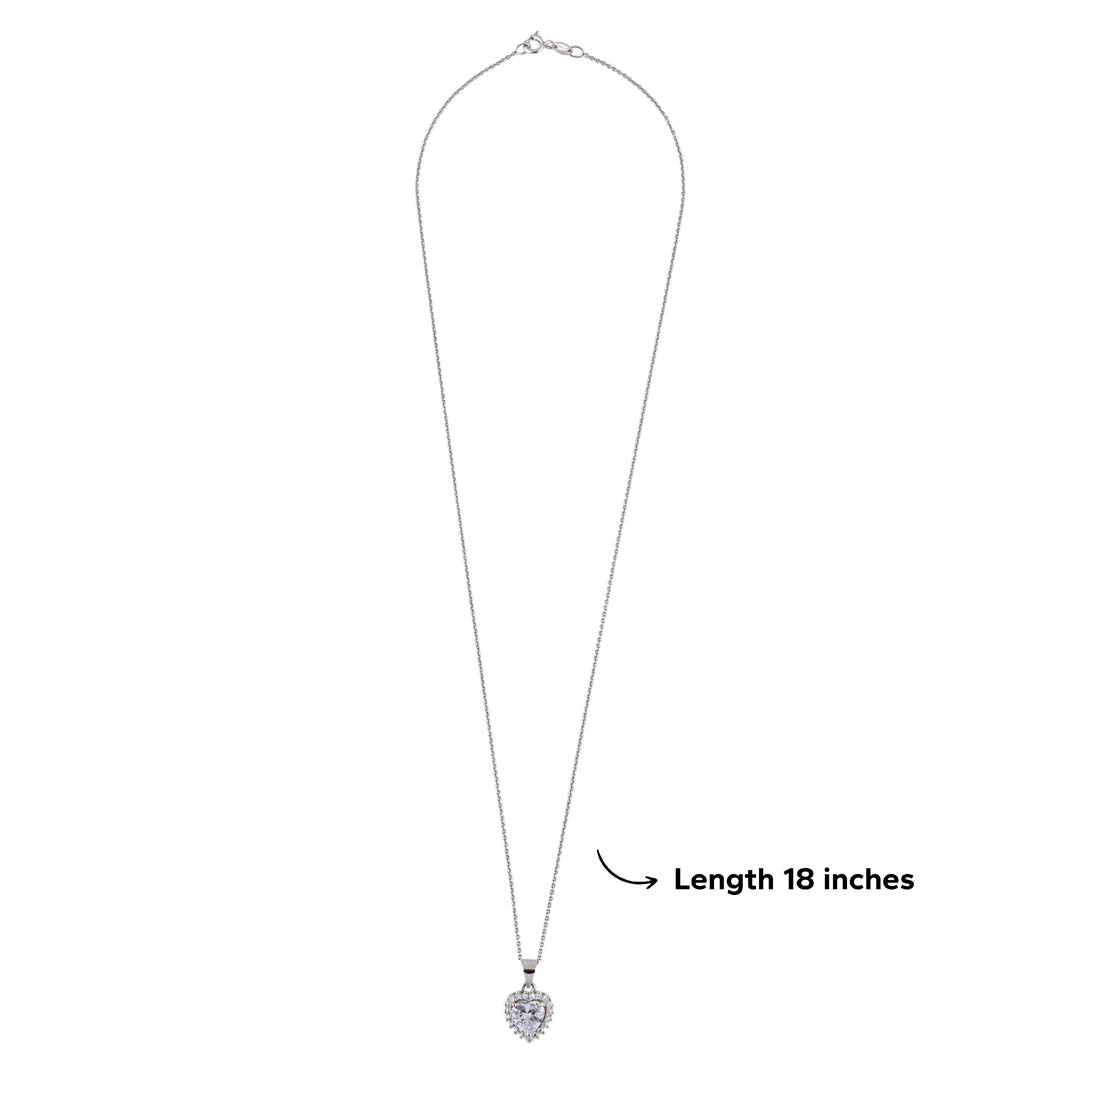 Silver Set Chain Pendant and Earrings with Sparkling Stones for Women